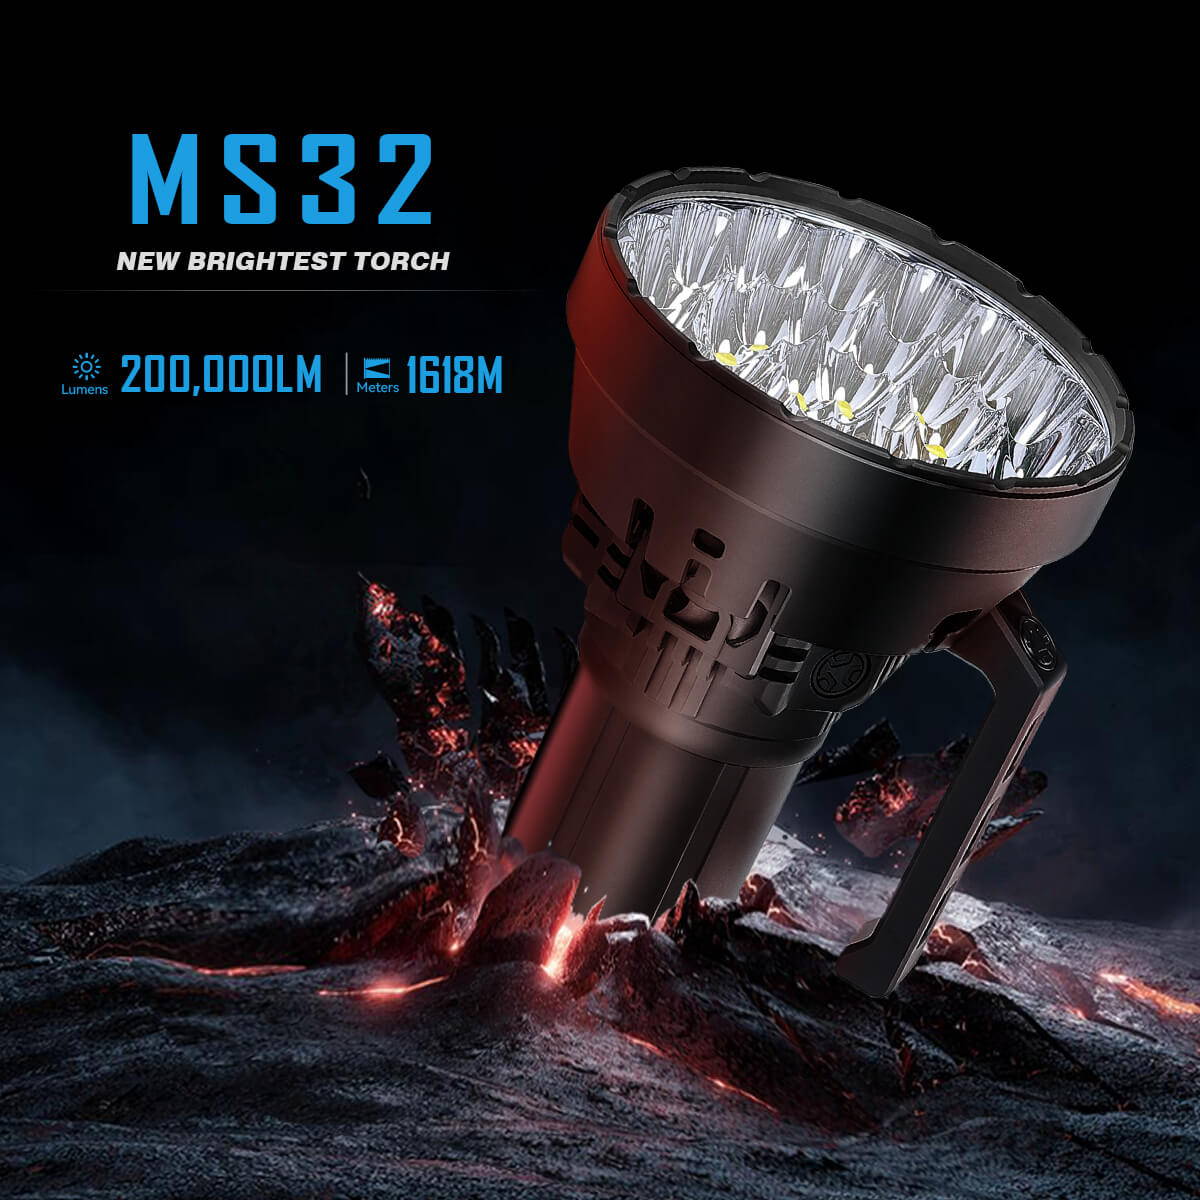 The MS32 the brightest torch